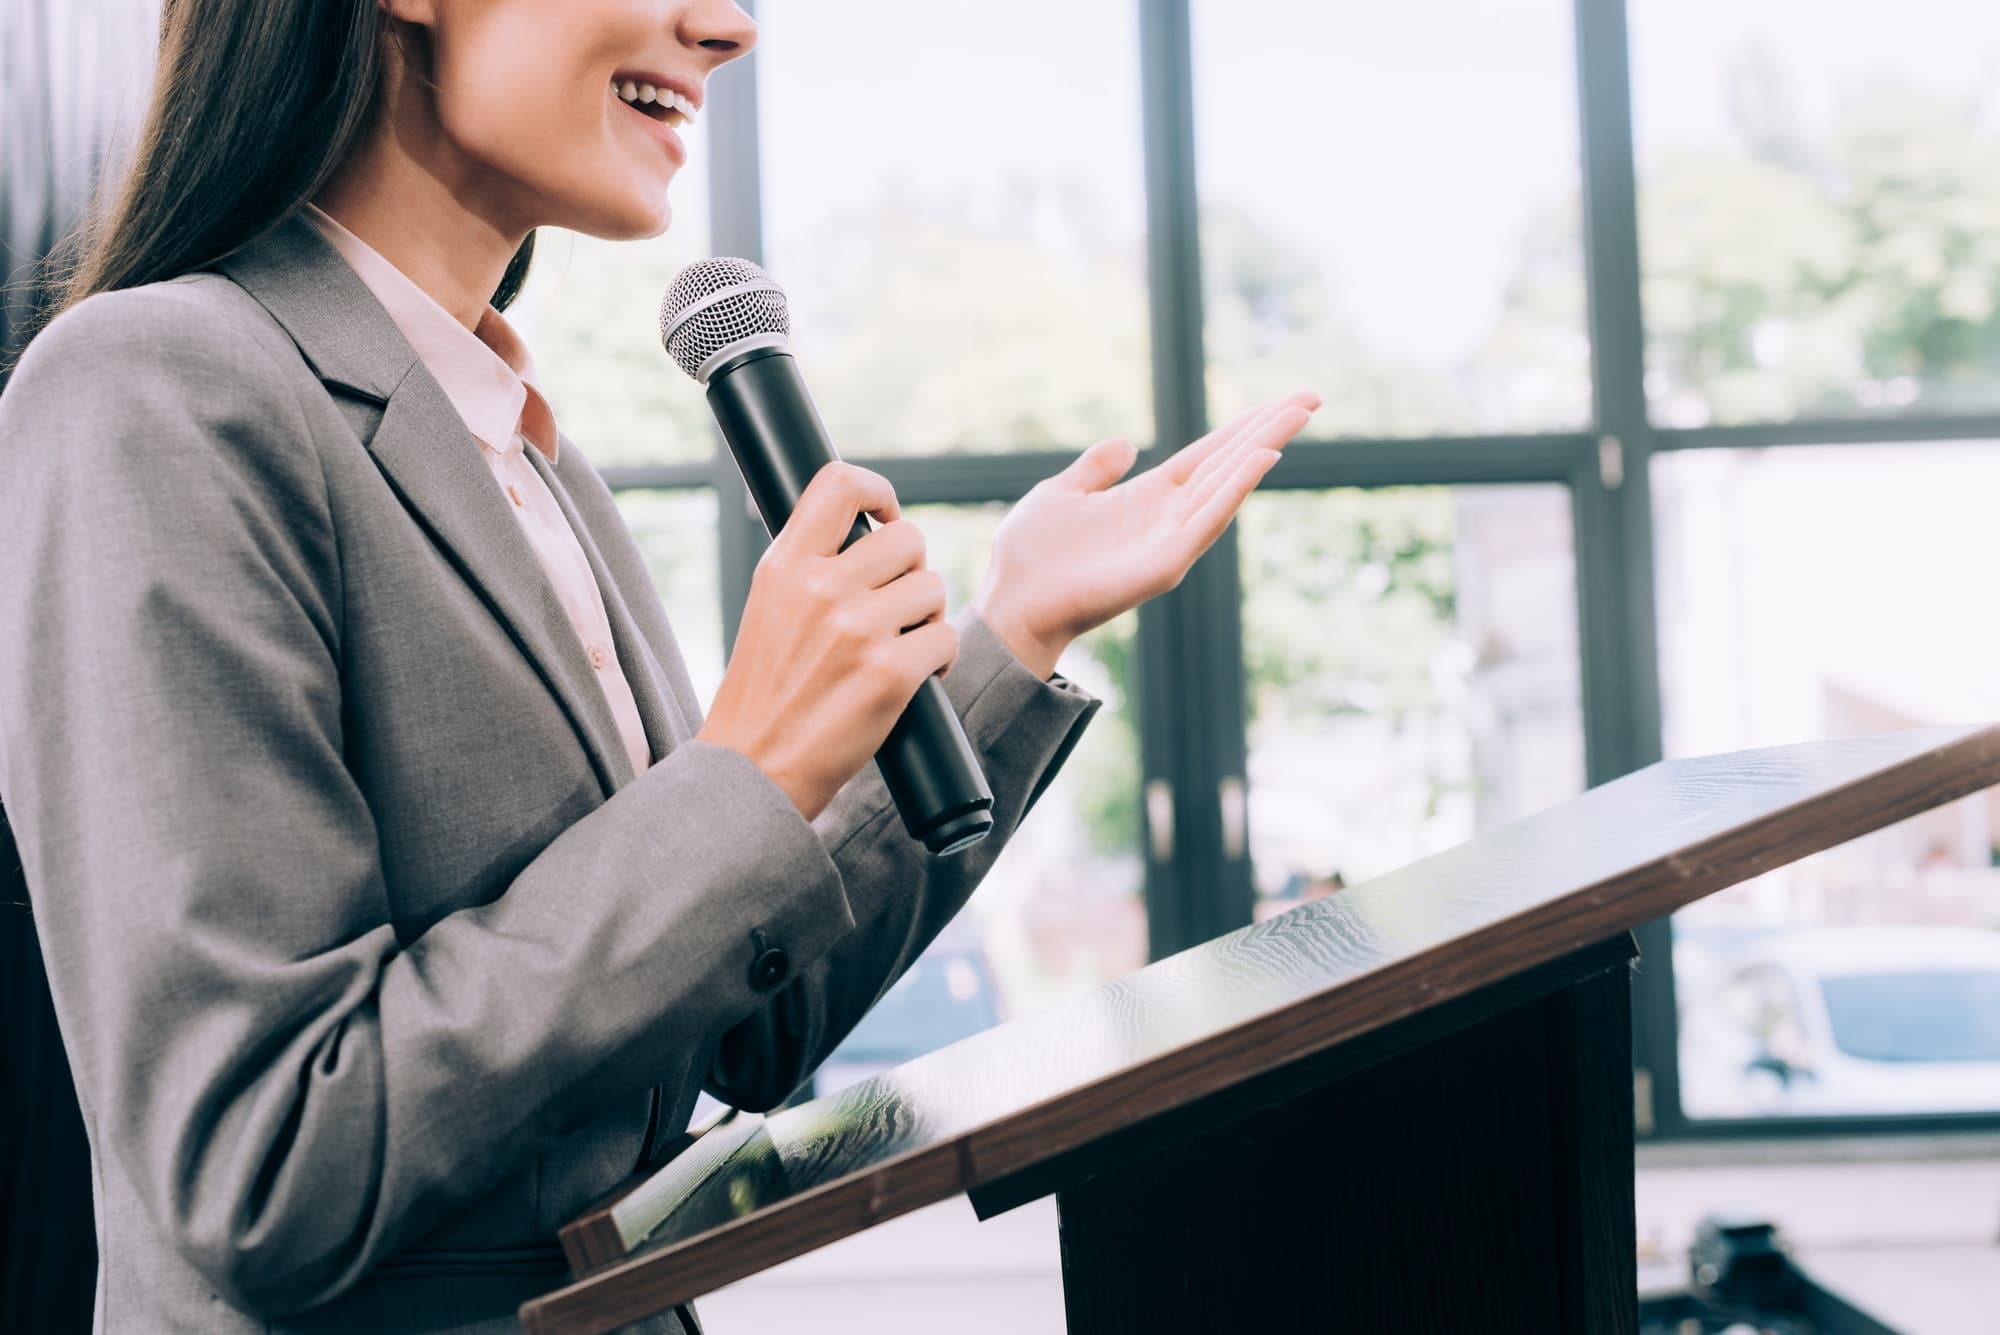 cropped image of smiling lecturer talking into microphone and gesturing at podium tribune during